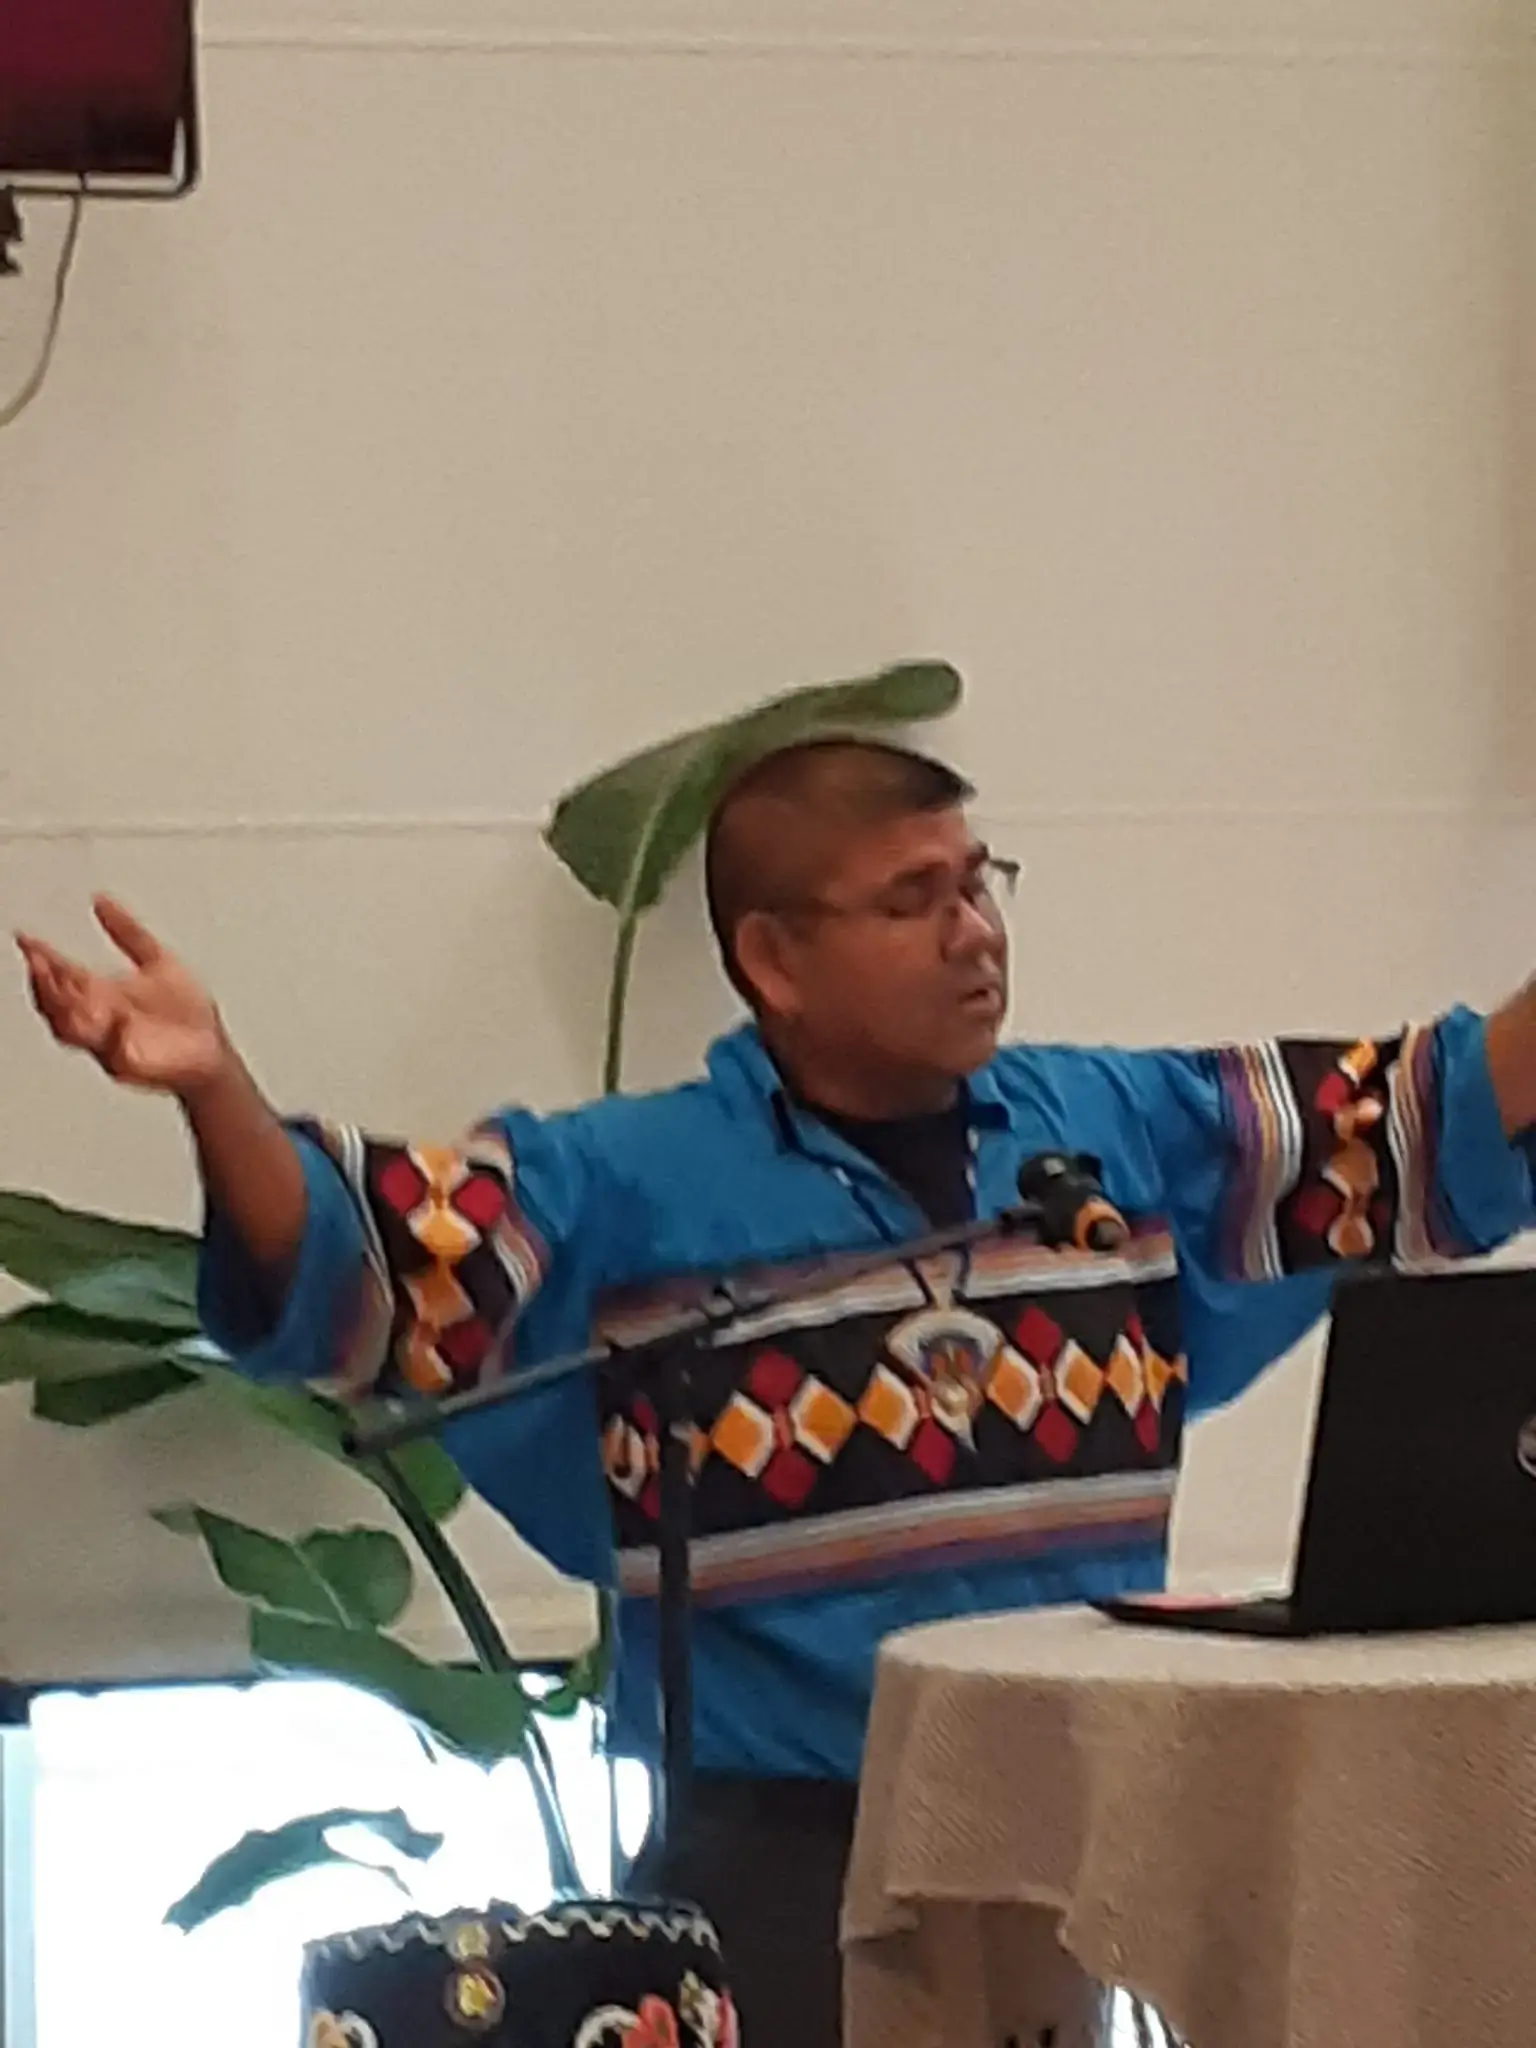 Chebon Kernel of the United Methodist Church in Oklahoma speaks to the WCC Indigenous Peoples' Pre-Assembly